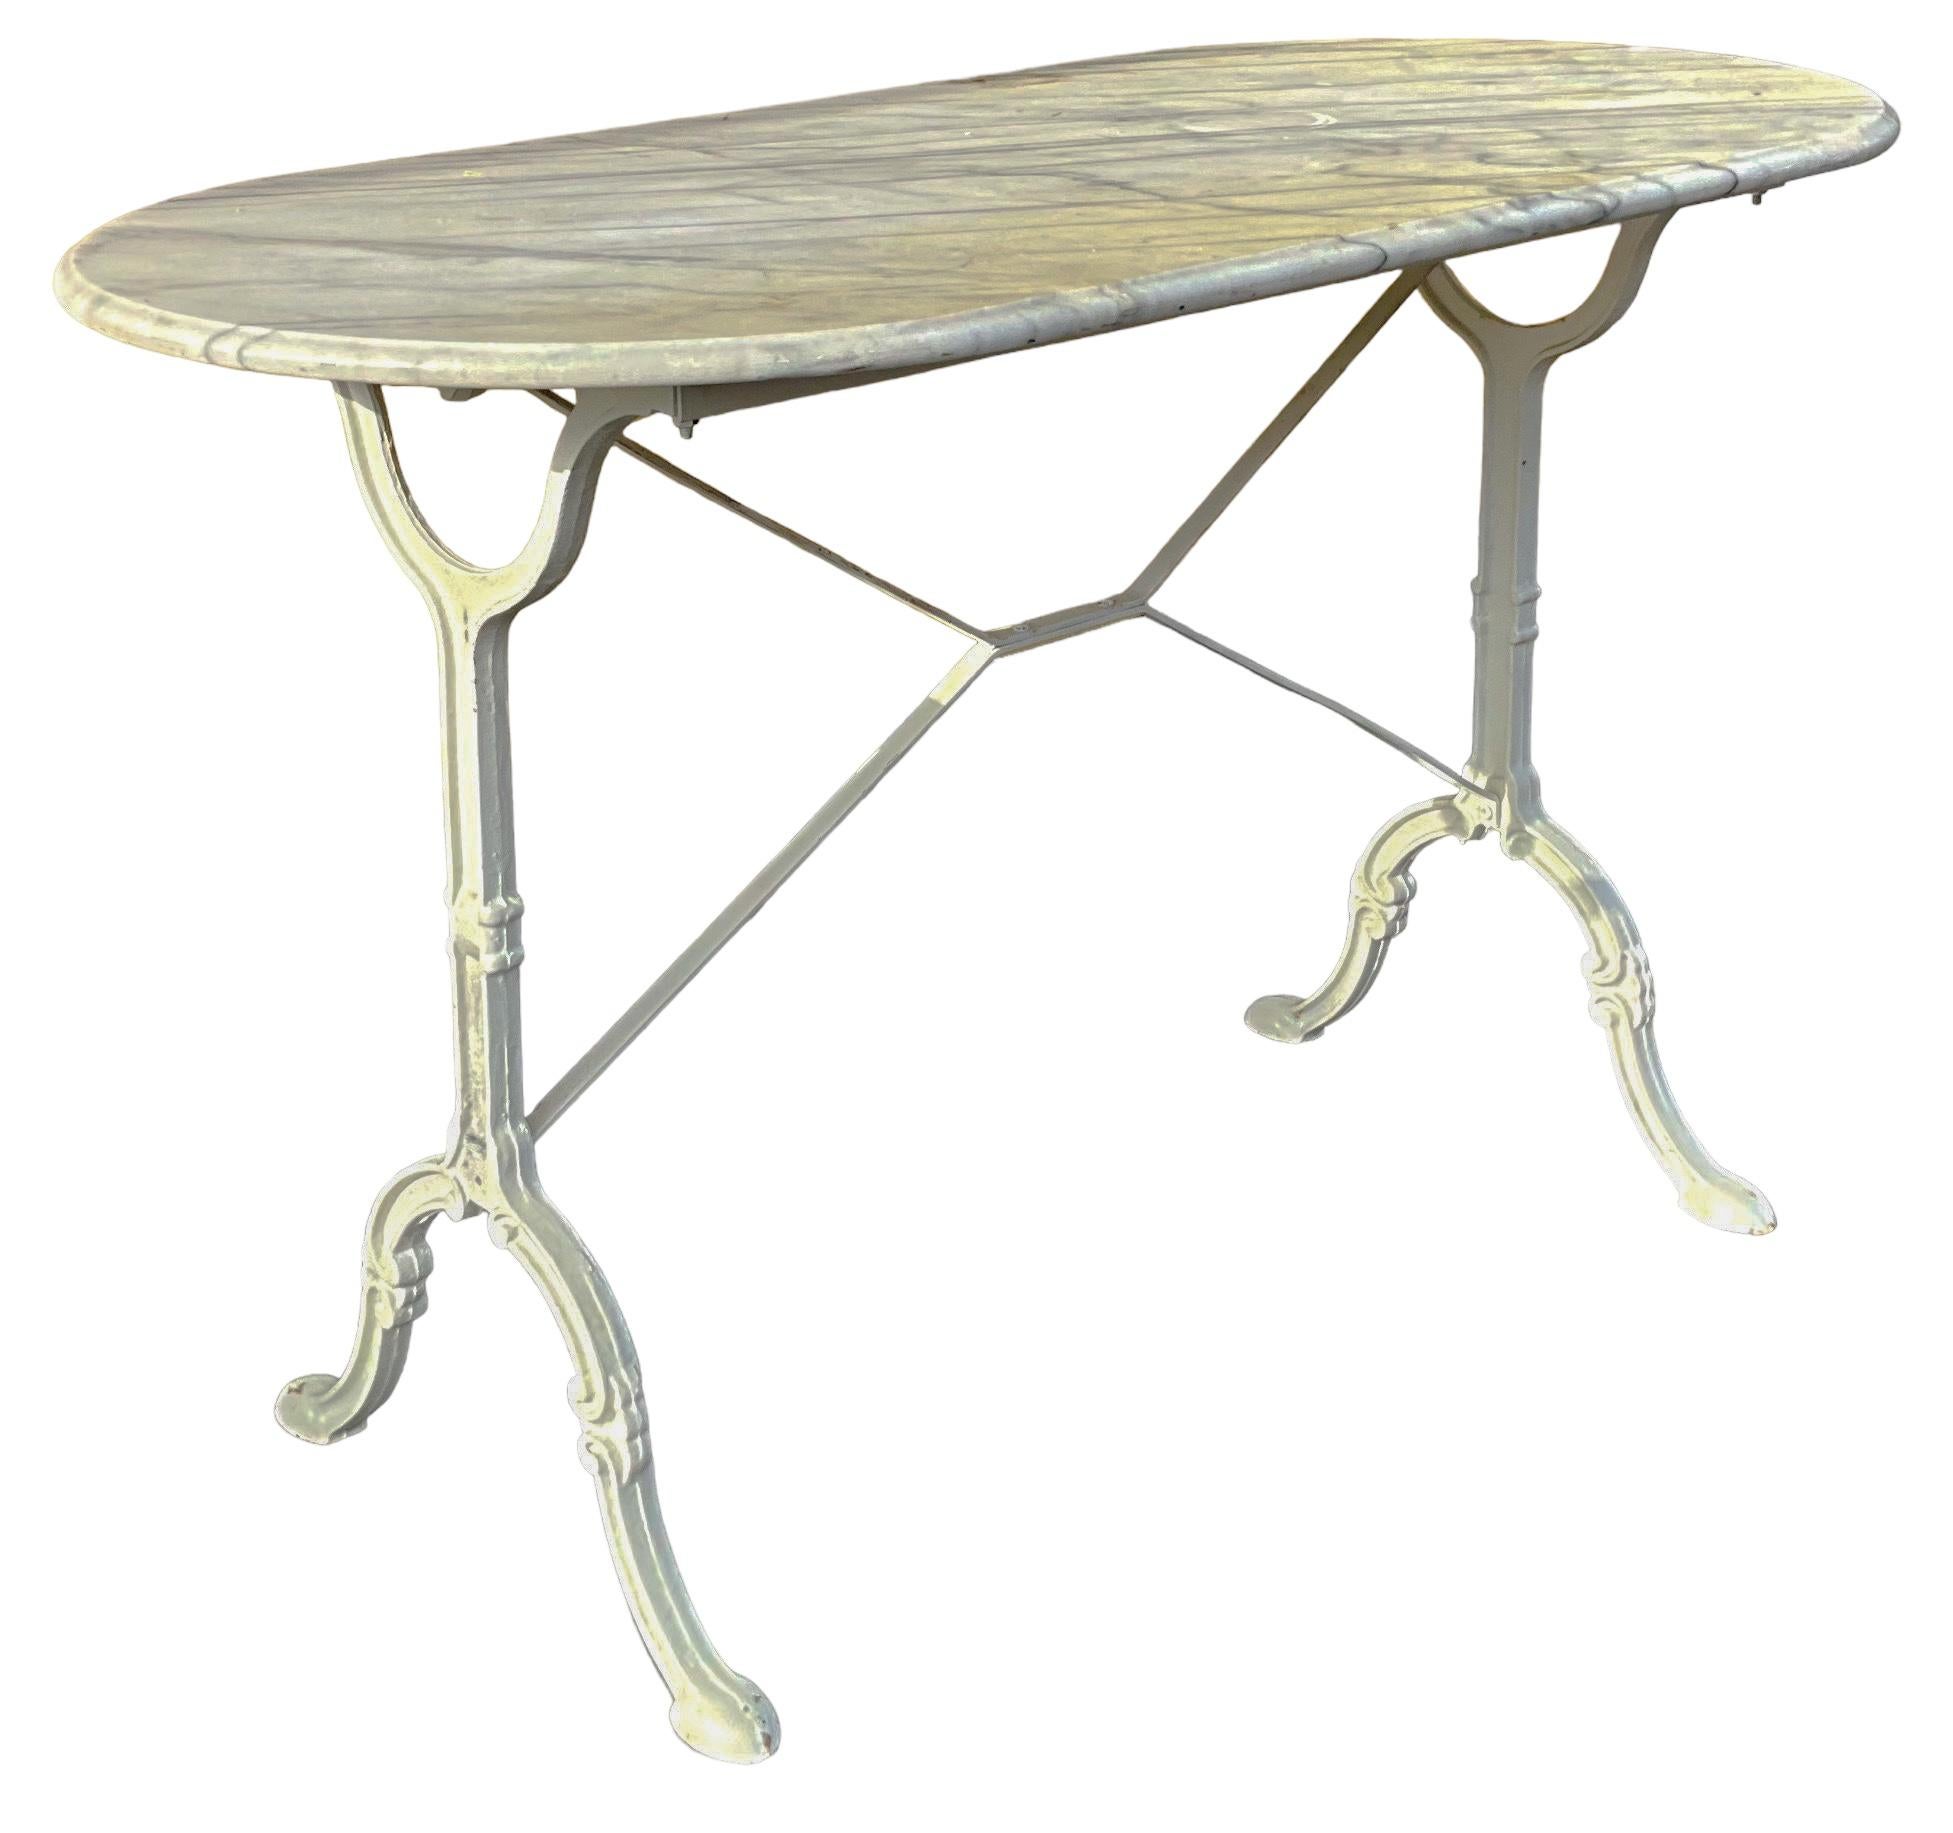 Aesthetic Movement Early 20th Century French Marble Top & Iron Console / Garden / Bistro Table For Sale